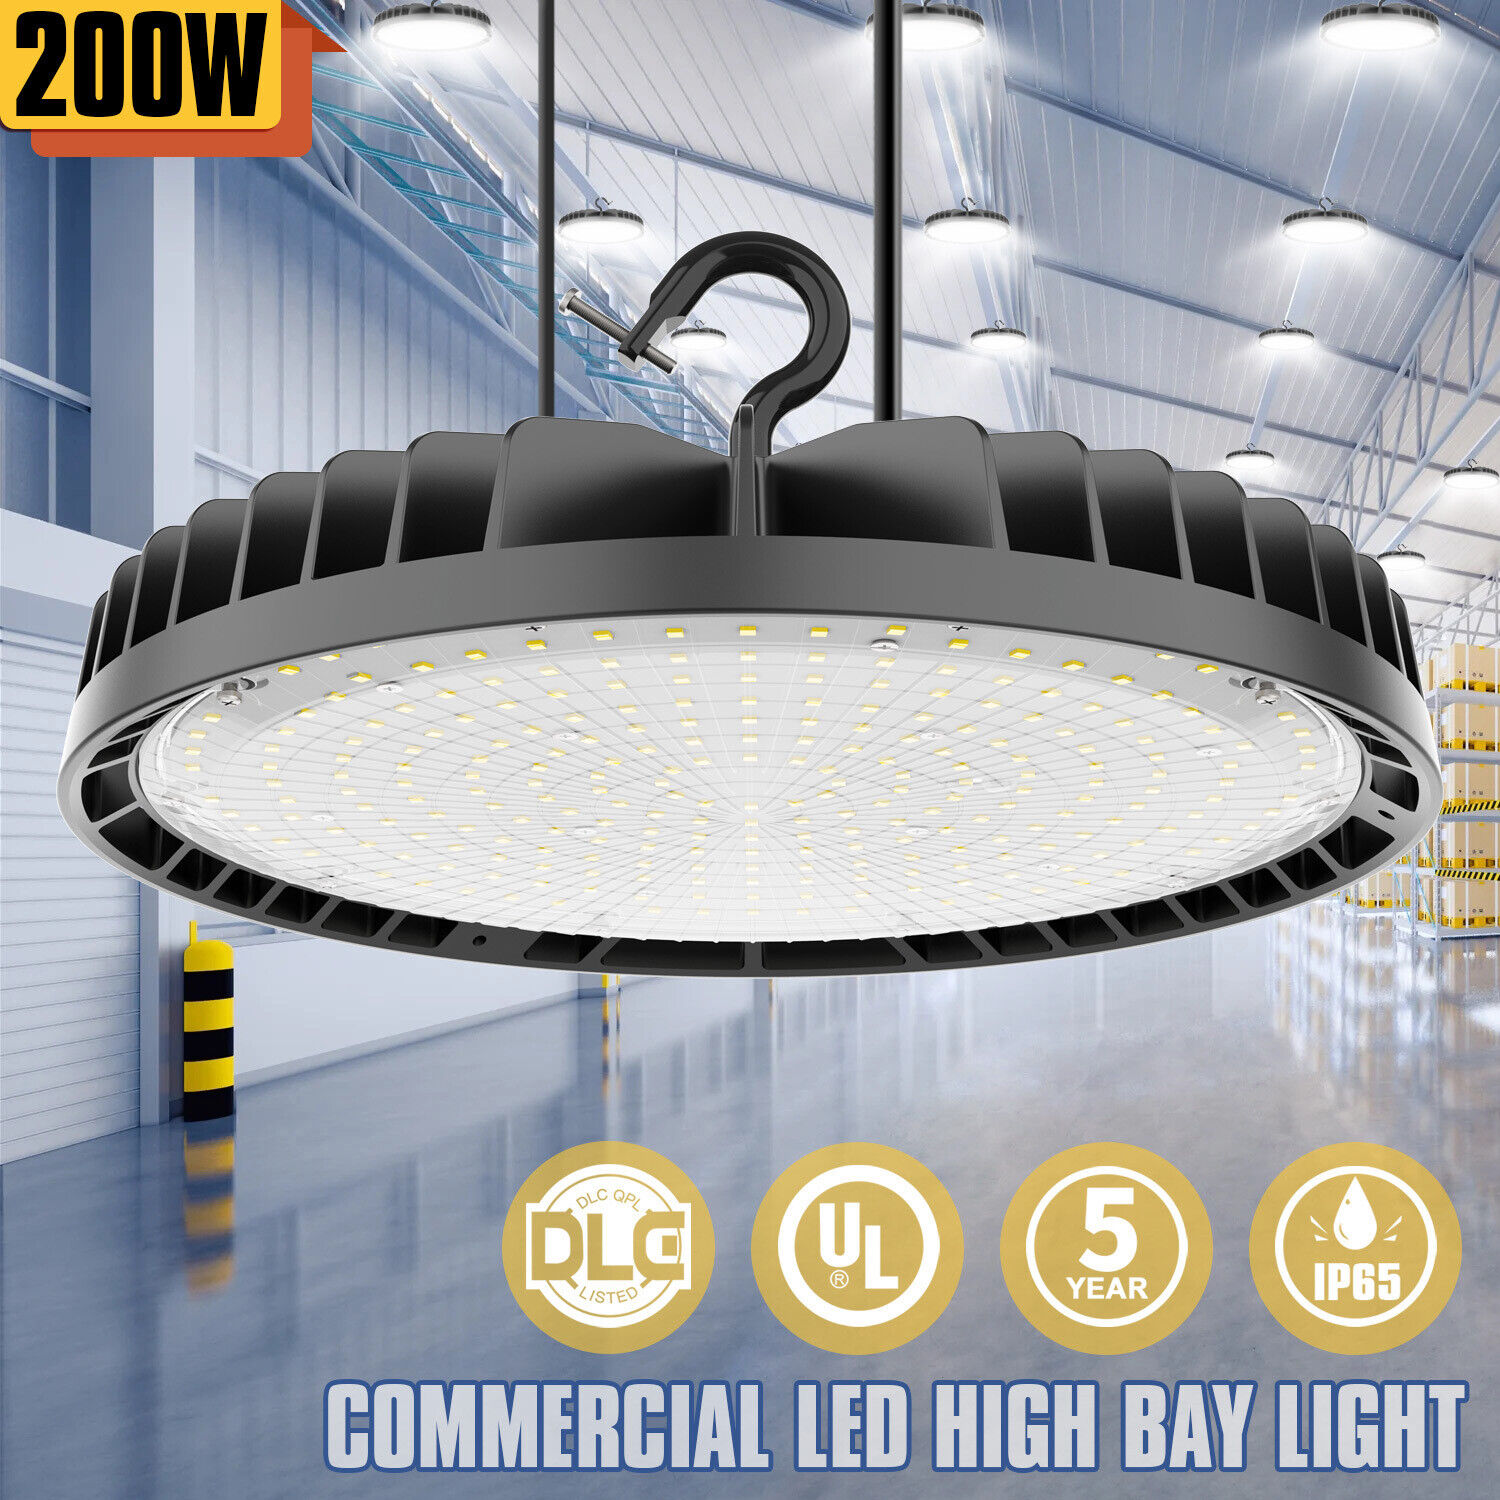 200W UFO Led High Bay Light Factory Warehouse Commercial Light Fixture Dimmable